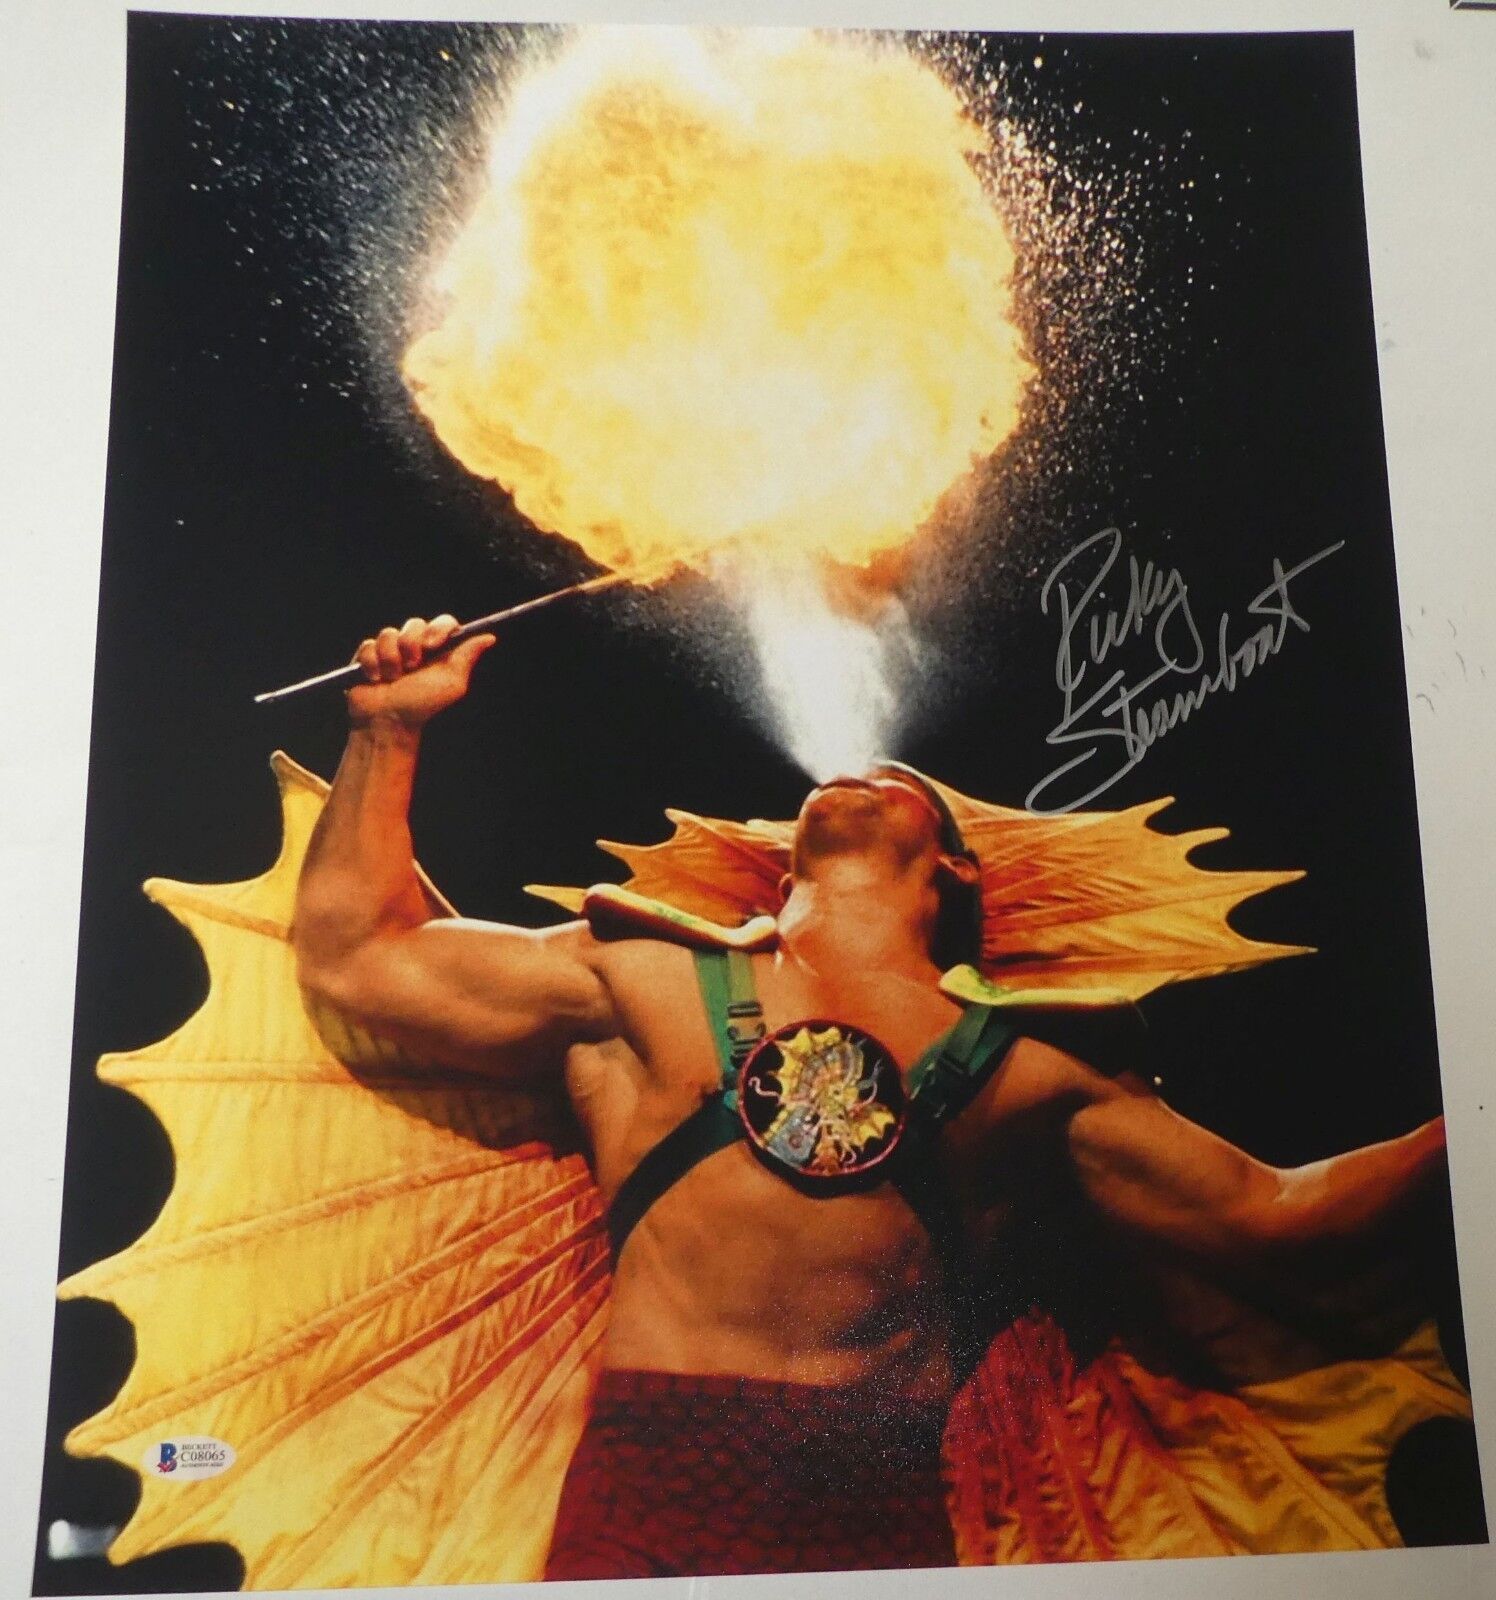 Ricky Steamboat Signed WWE 16x20 Photo Poster painting BAS COA Pro Wrestling Picture Autograph 5